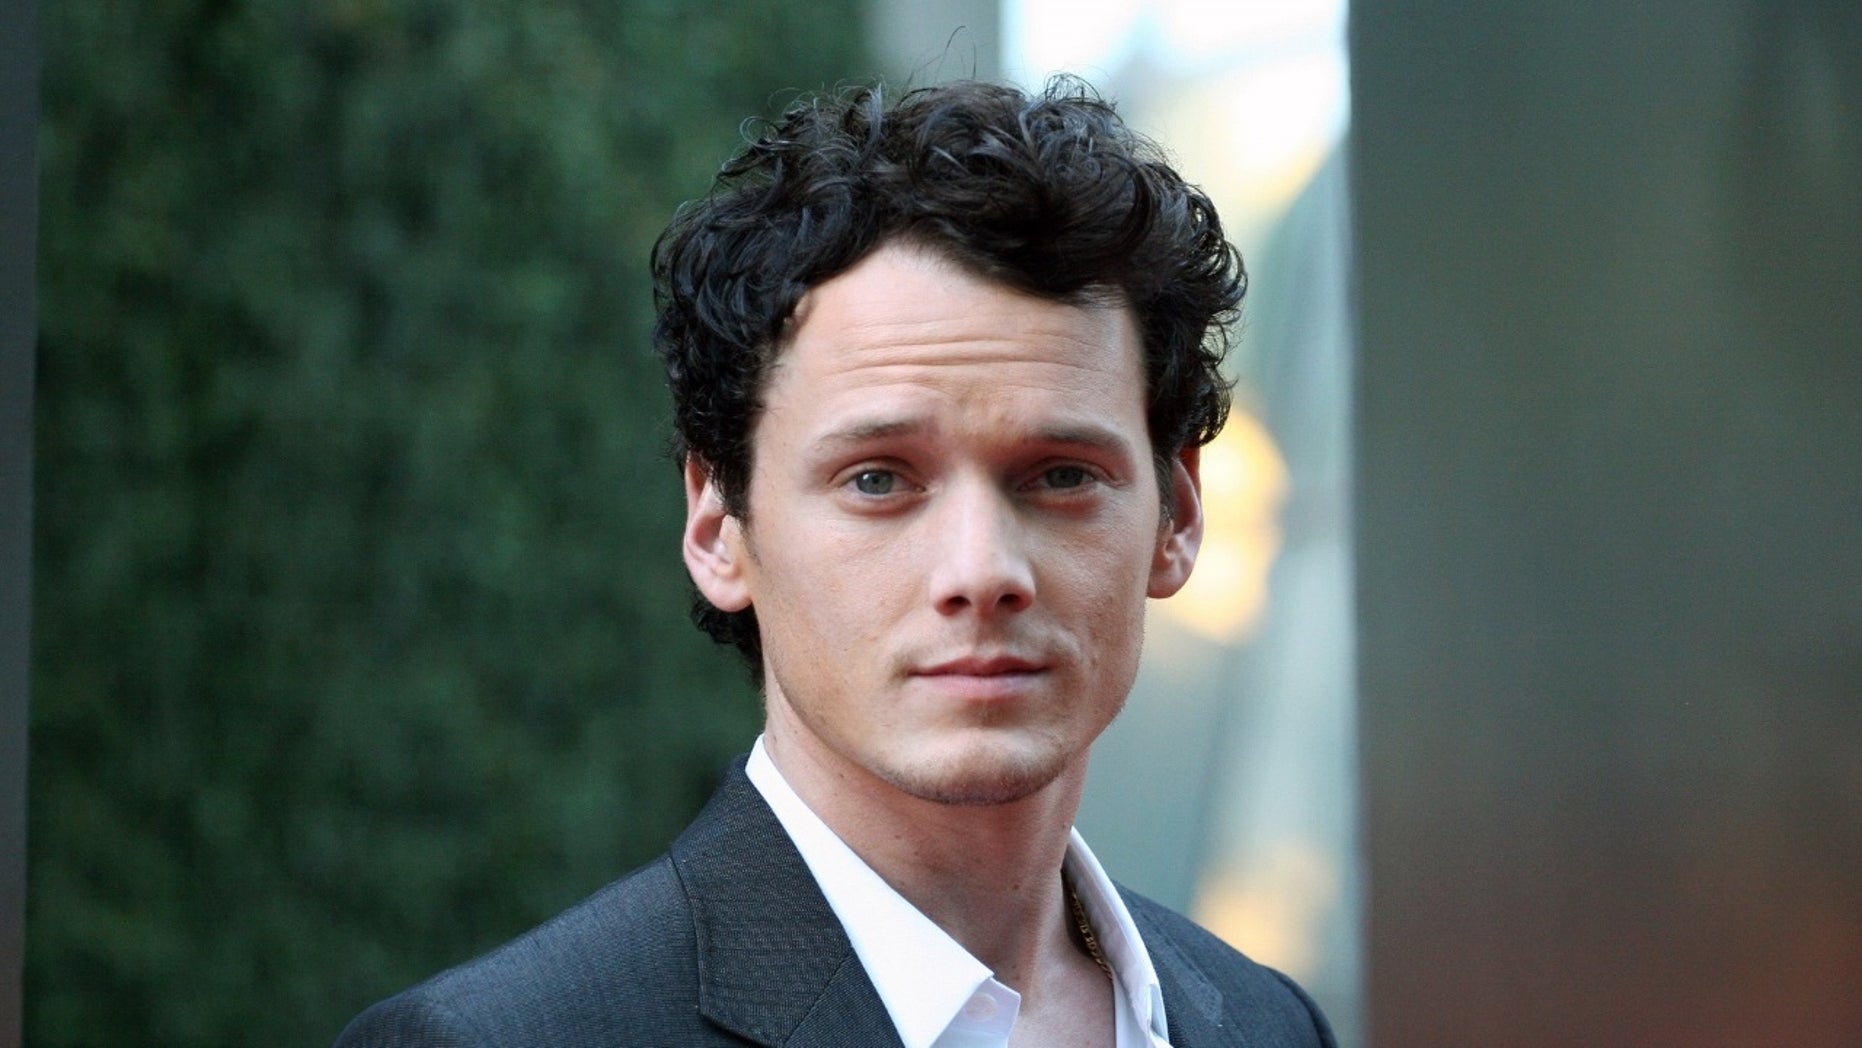 Anton Yelchin’s parents, still mourning his death, remember his life in new documentary 